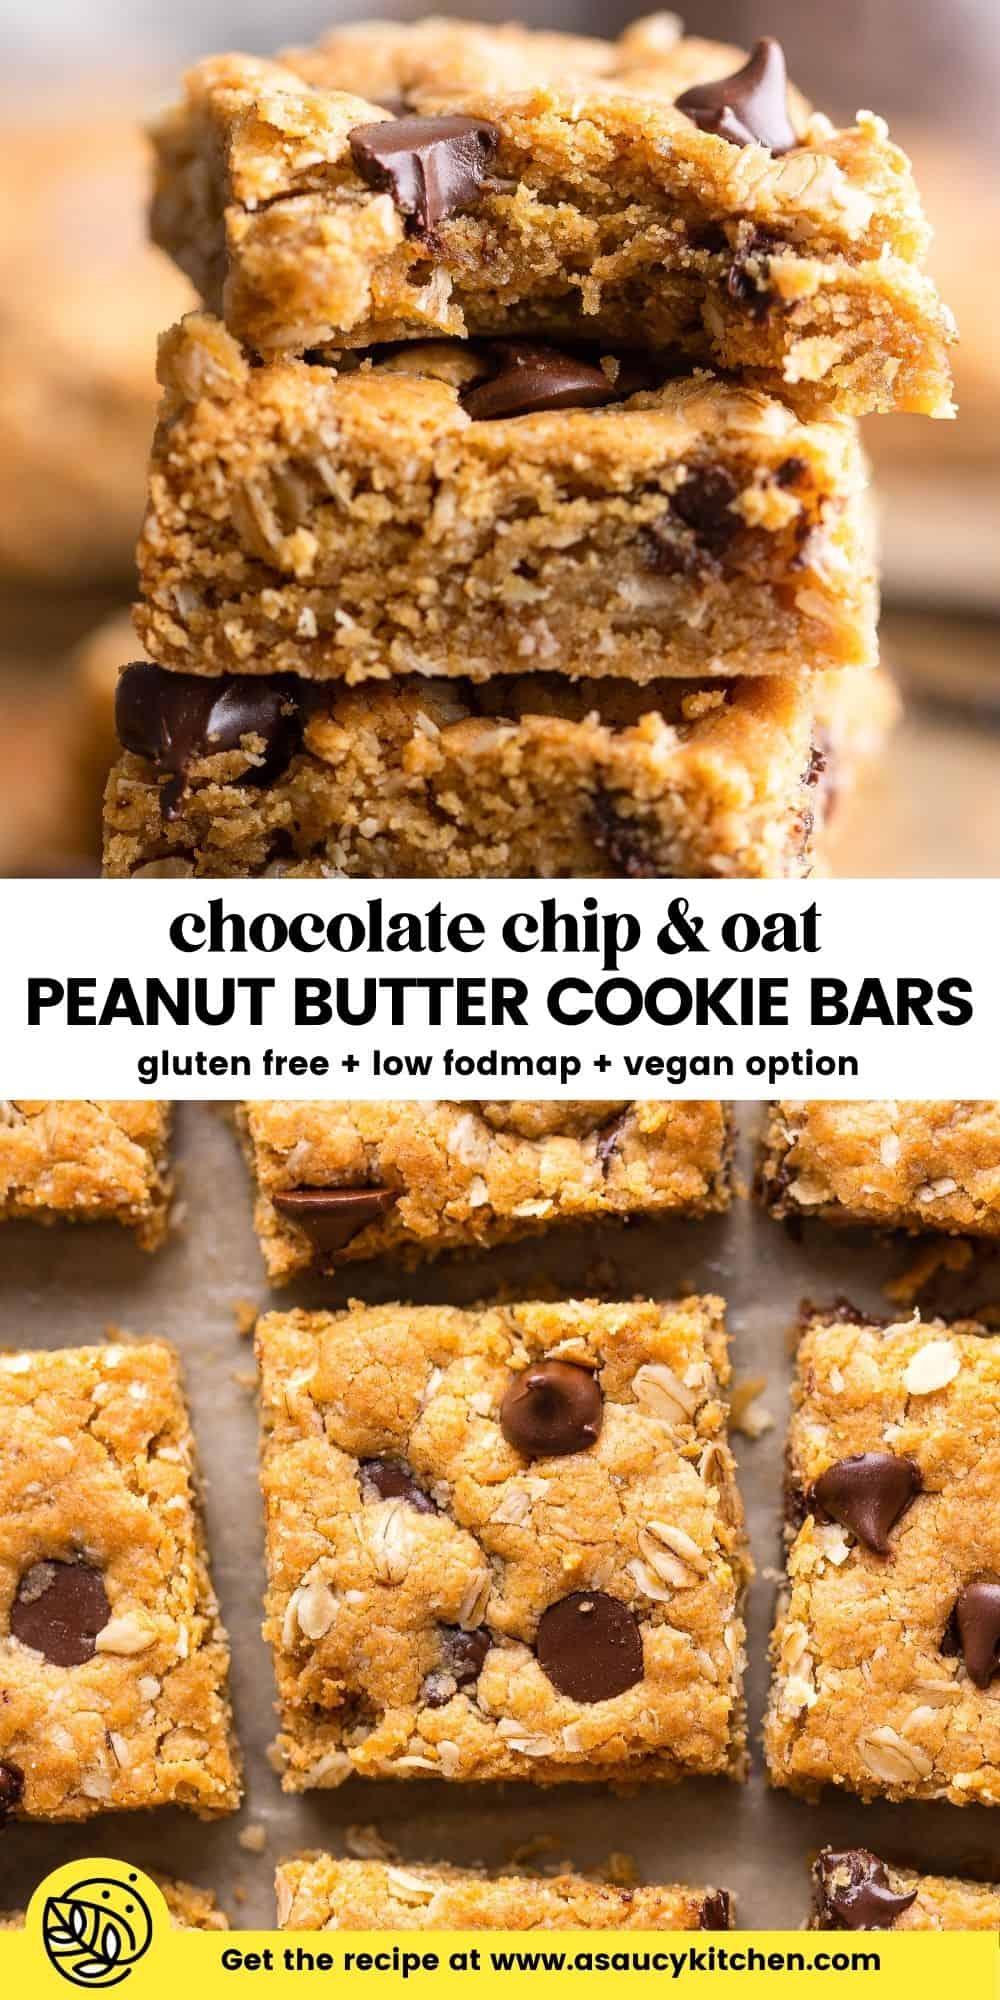 Peanut Butter Cookie Bars with Oats (GF + Vegan Option) - A Saucy Kitchen